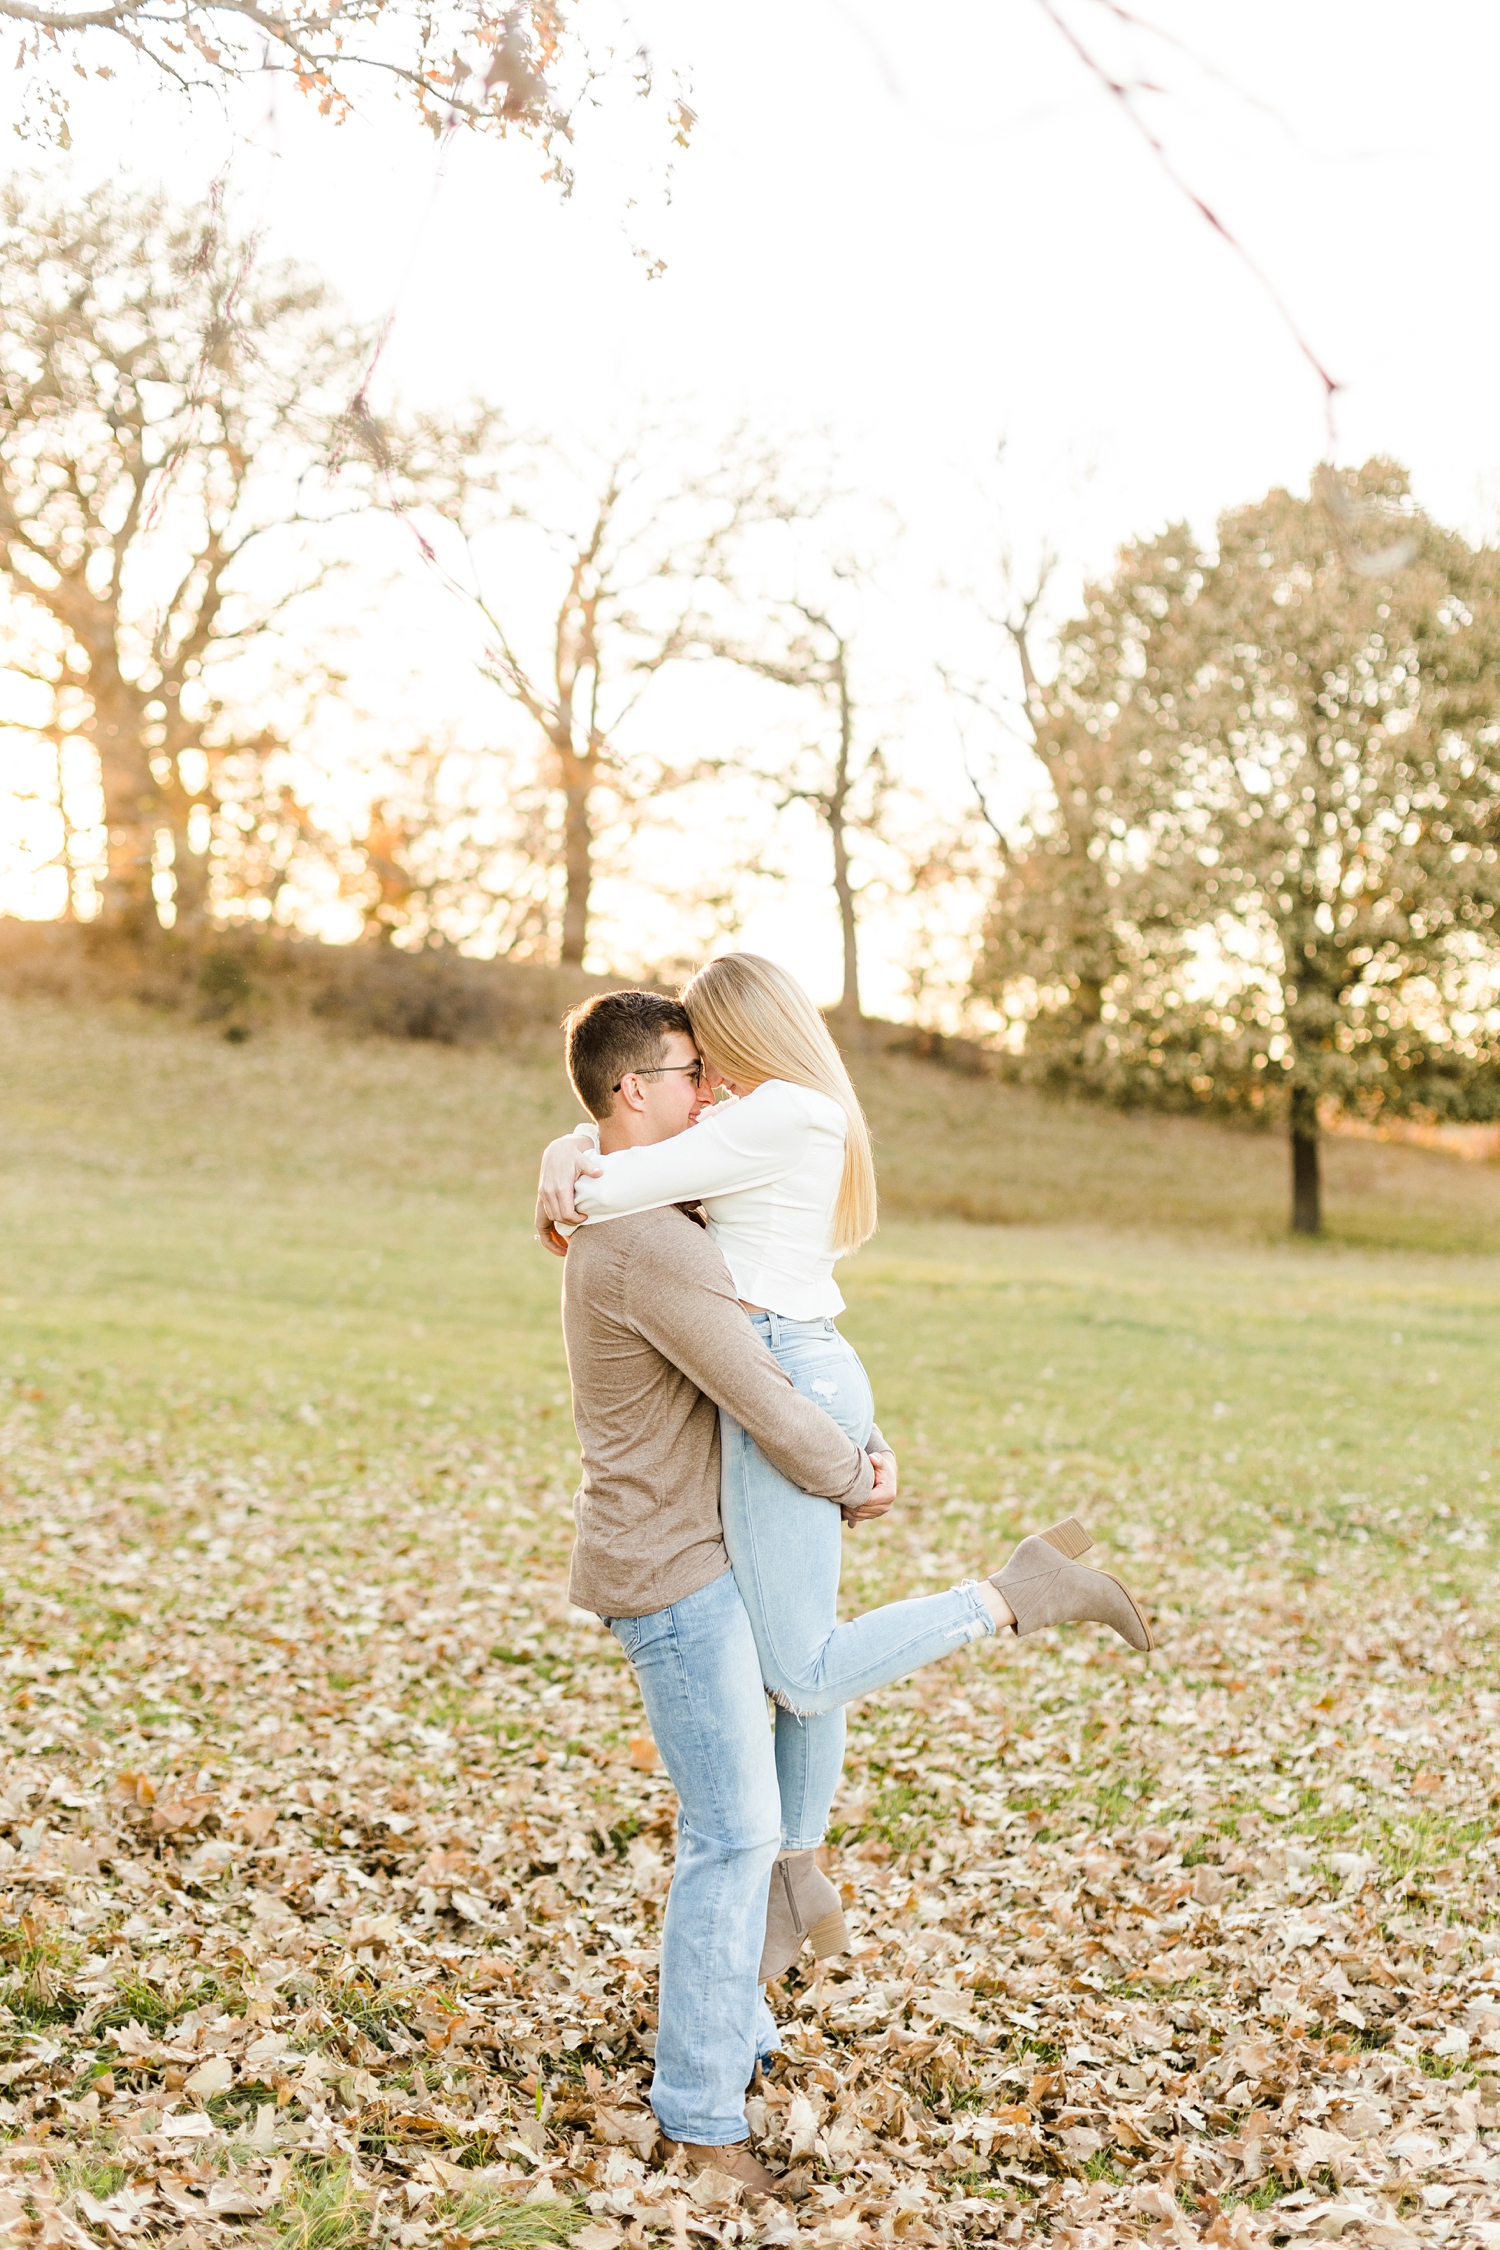 Quinton picks Alli up and rest foreheads together in a grassy pasture full of leaves during golden hour | CB Studio